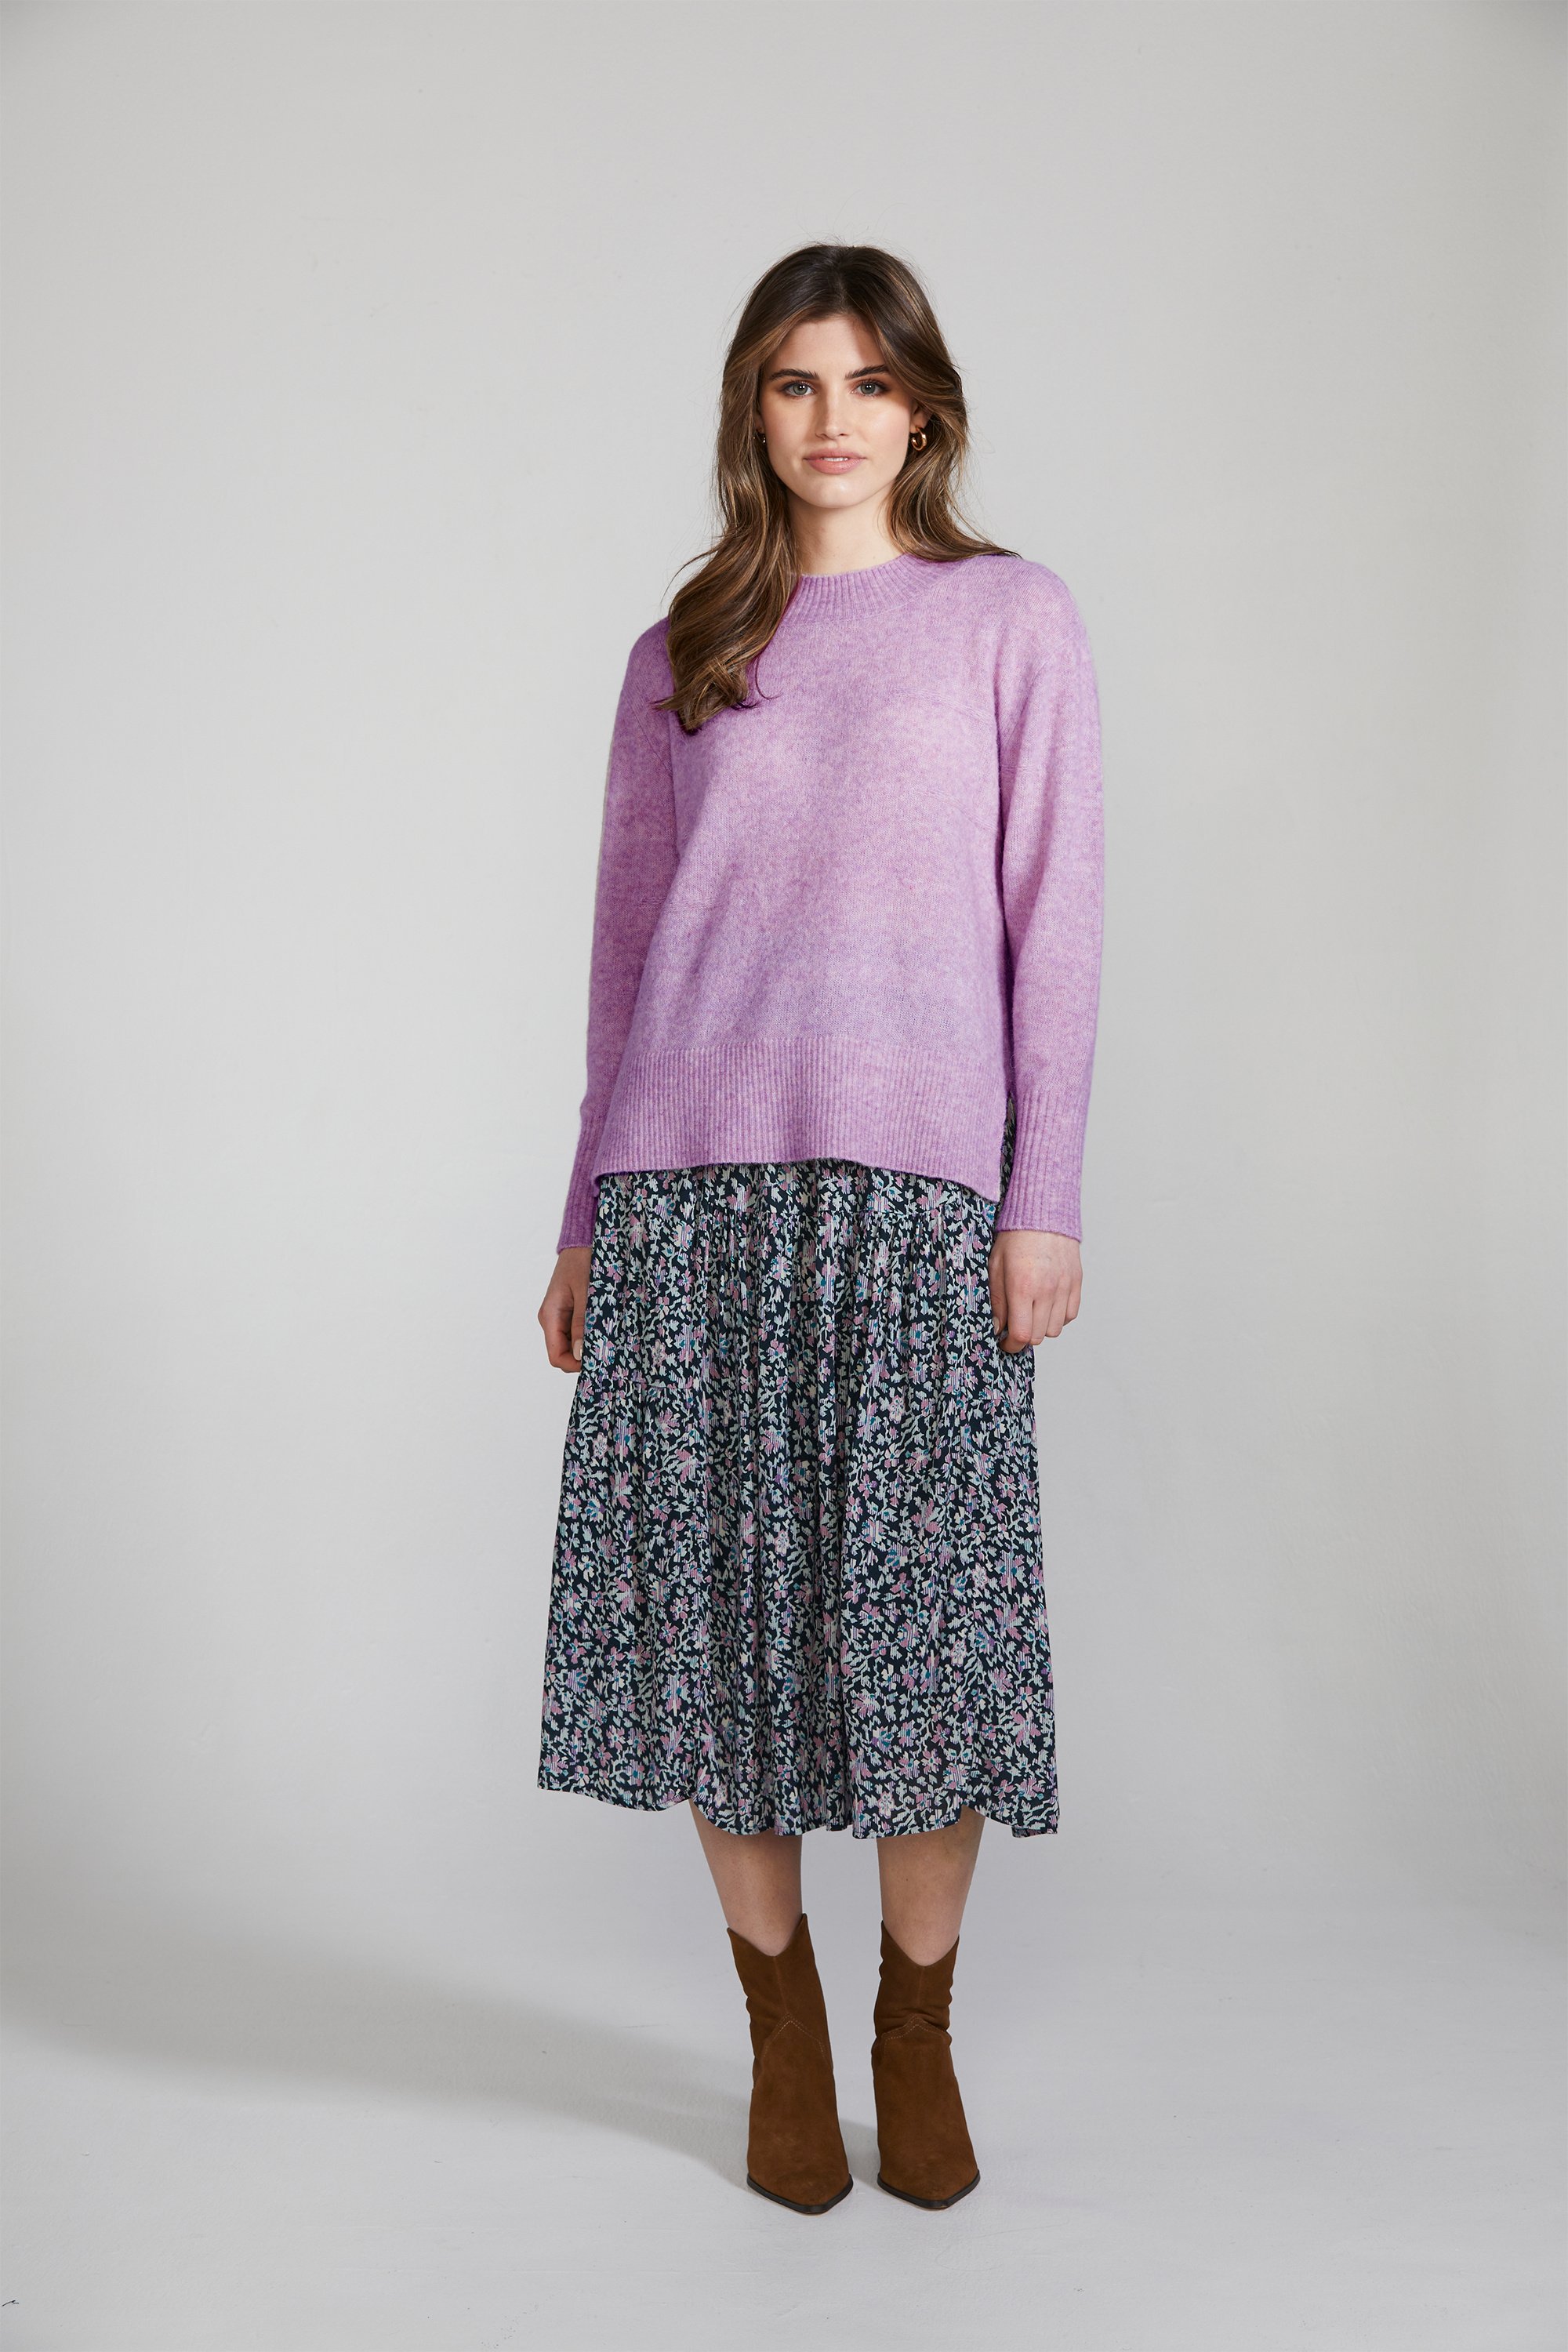 Vogue Women's Sweater - Lania the Label | Buy Lania the Label Online ...